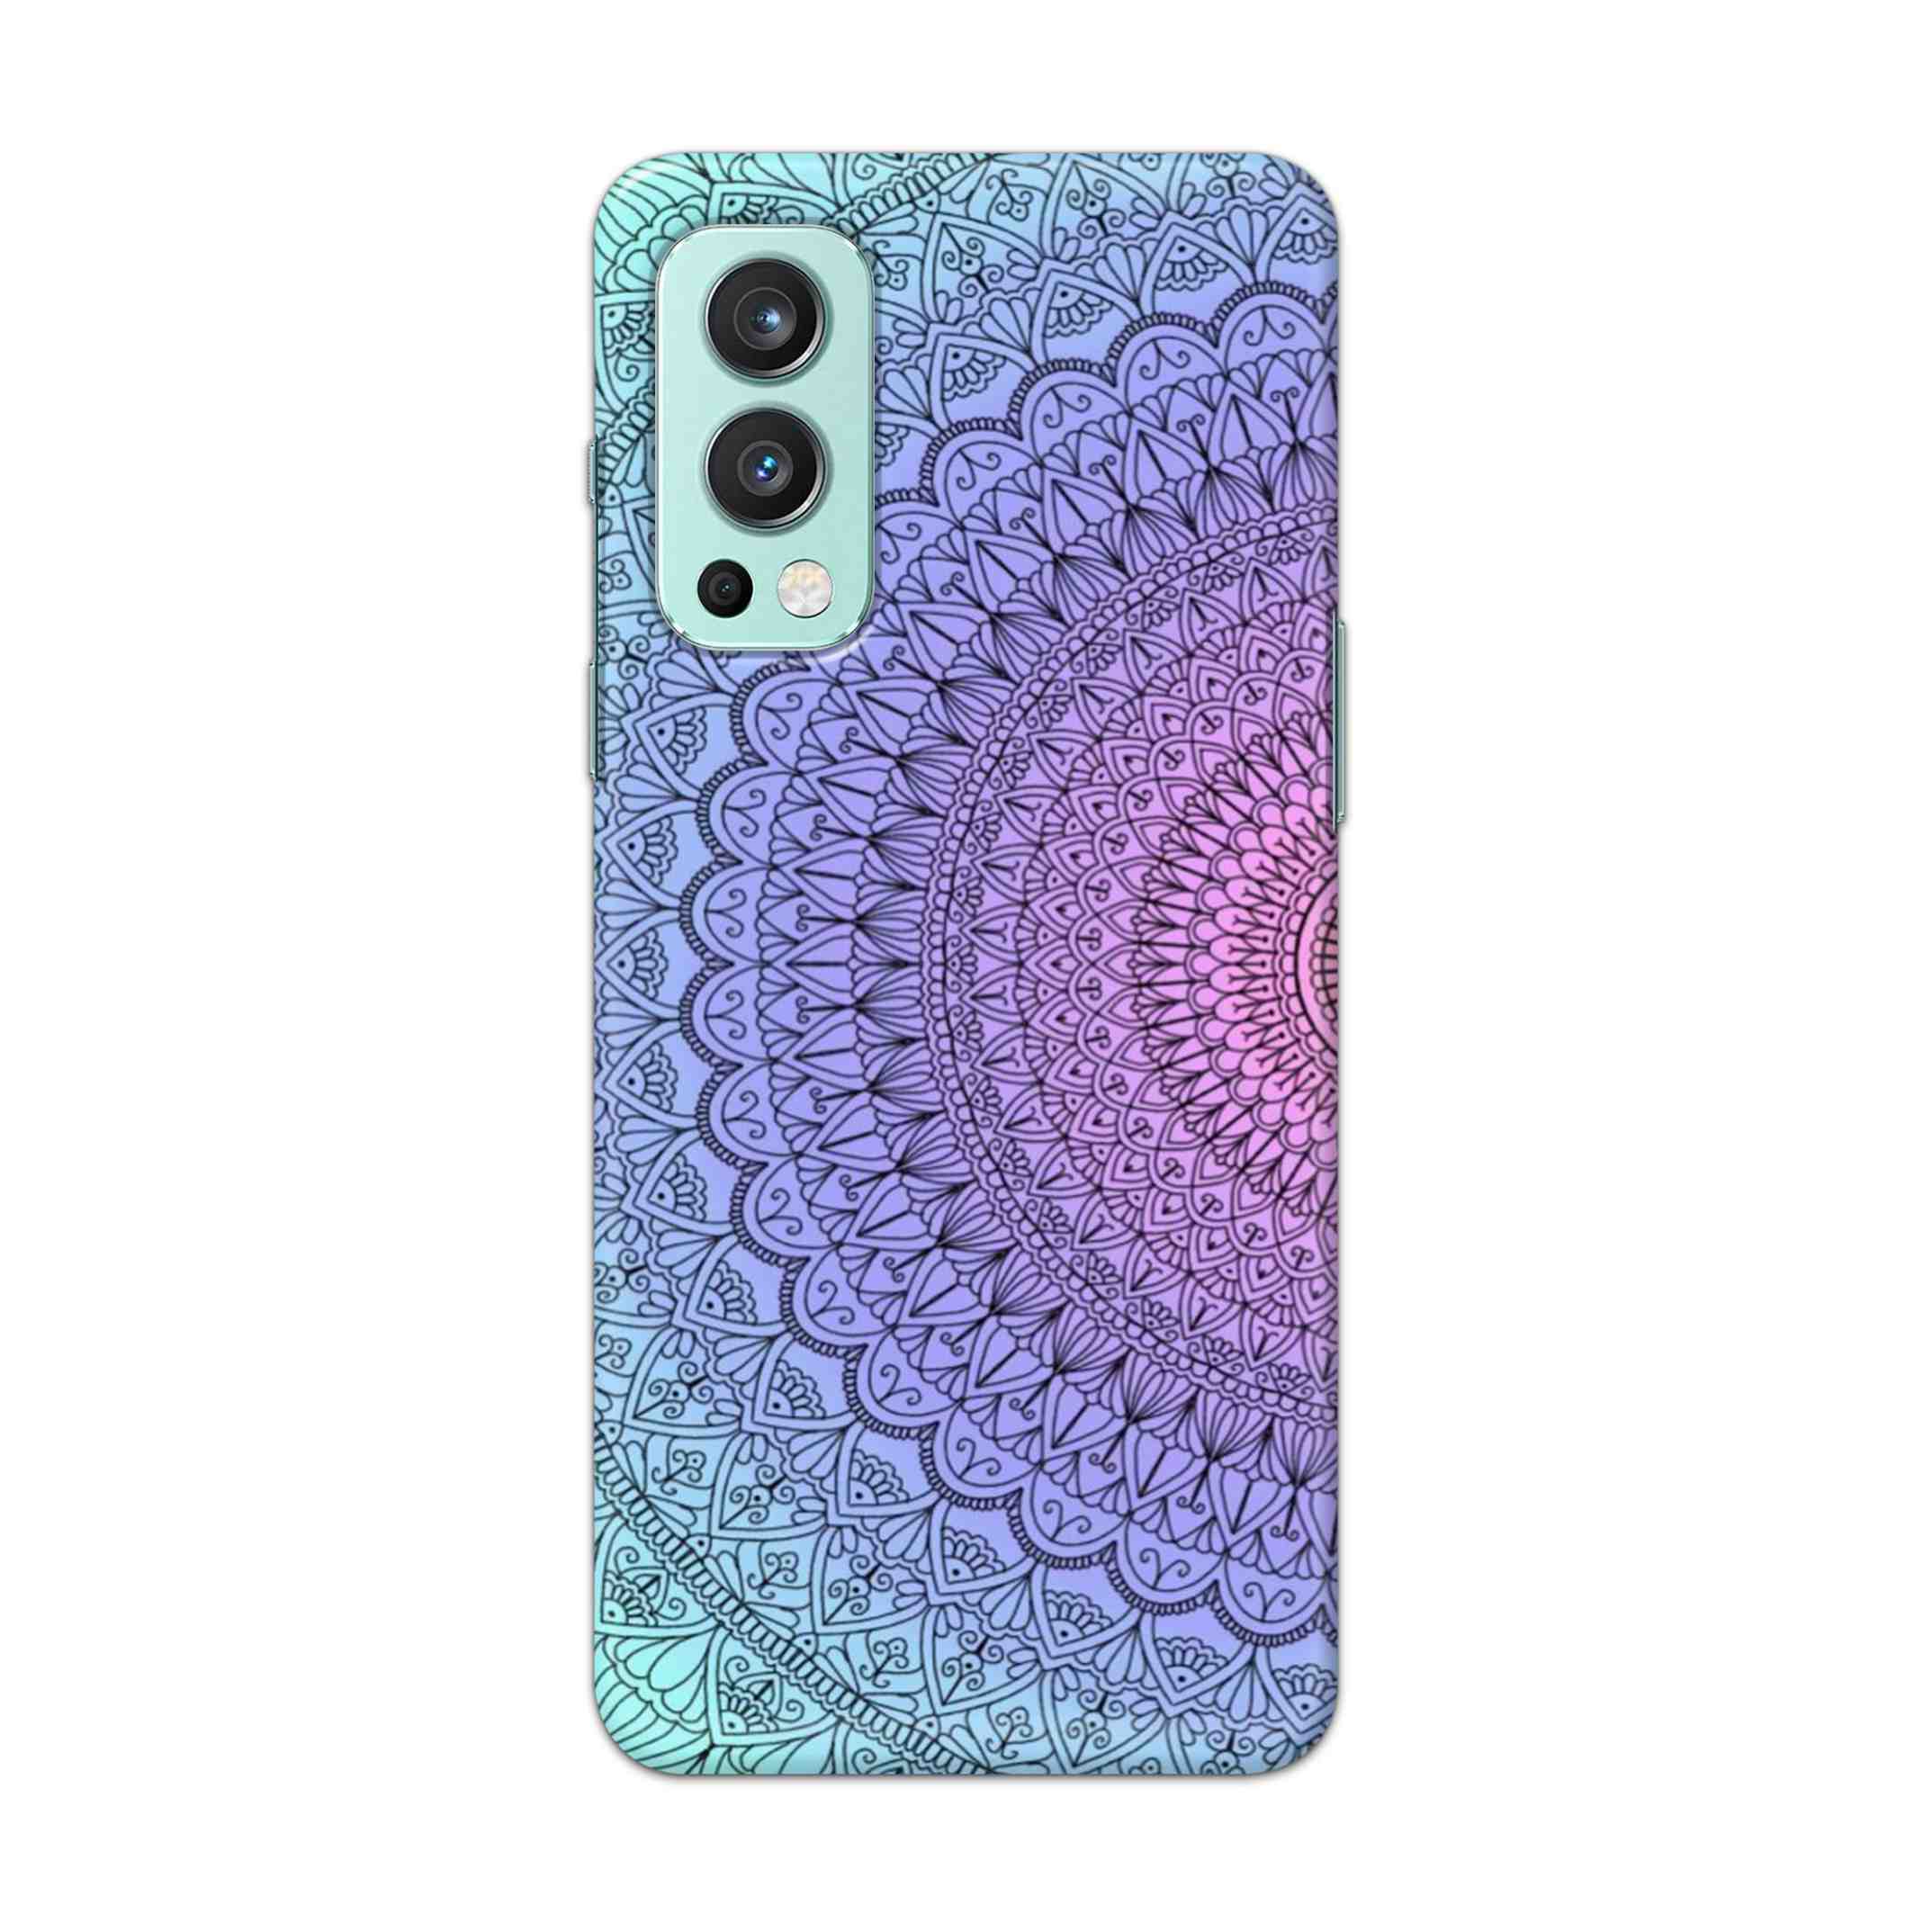 Buy Colourful Mandala Hard Back Mobile Phone Case Cover For OnePlus Nord 2 5G Online